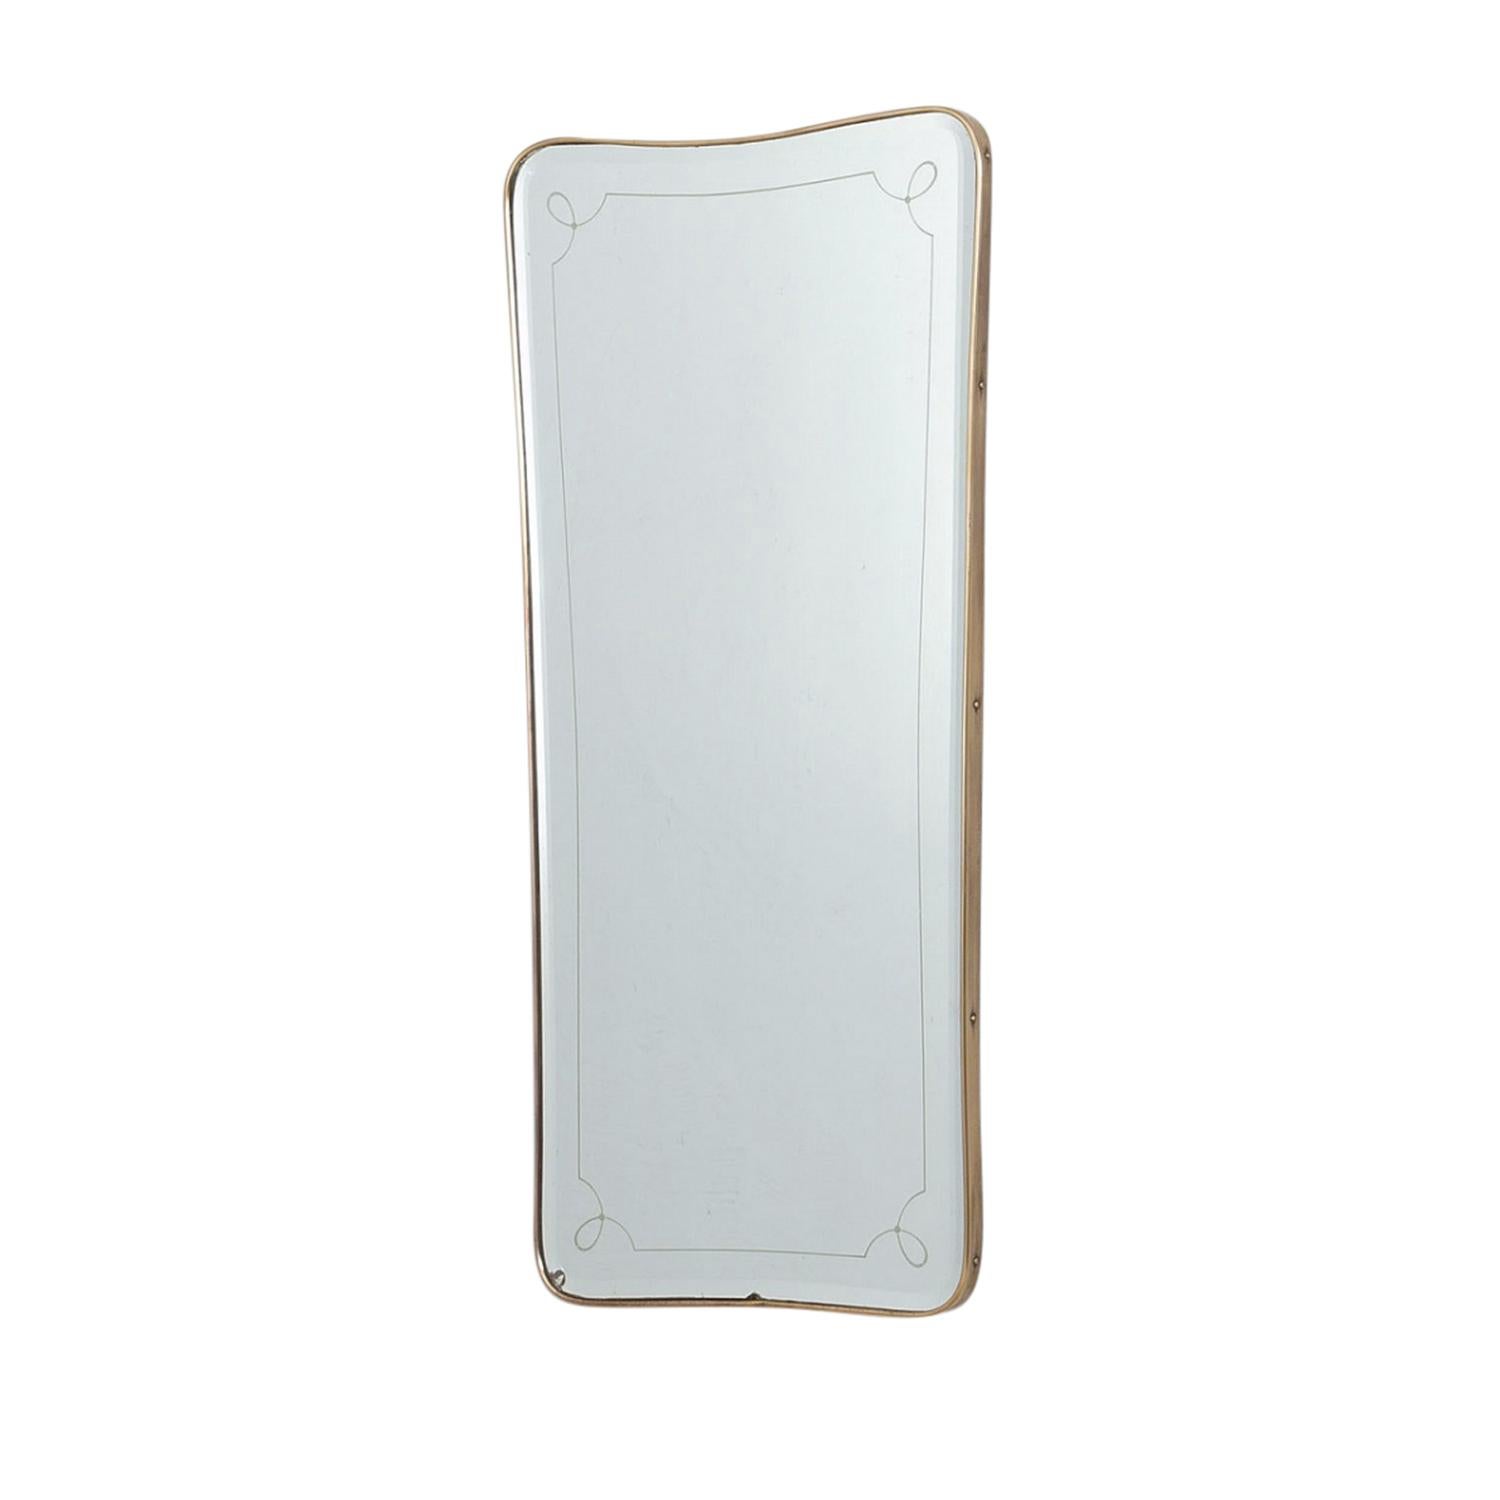 Polished 20th Century French Art Deco Asymmetrical Brass Wall Glass Mirror, Vintage Décor For Sale